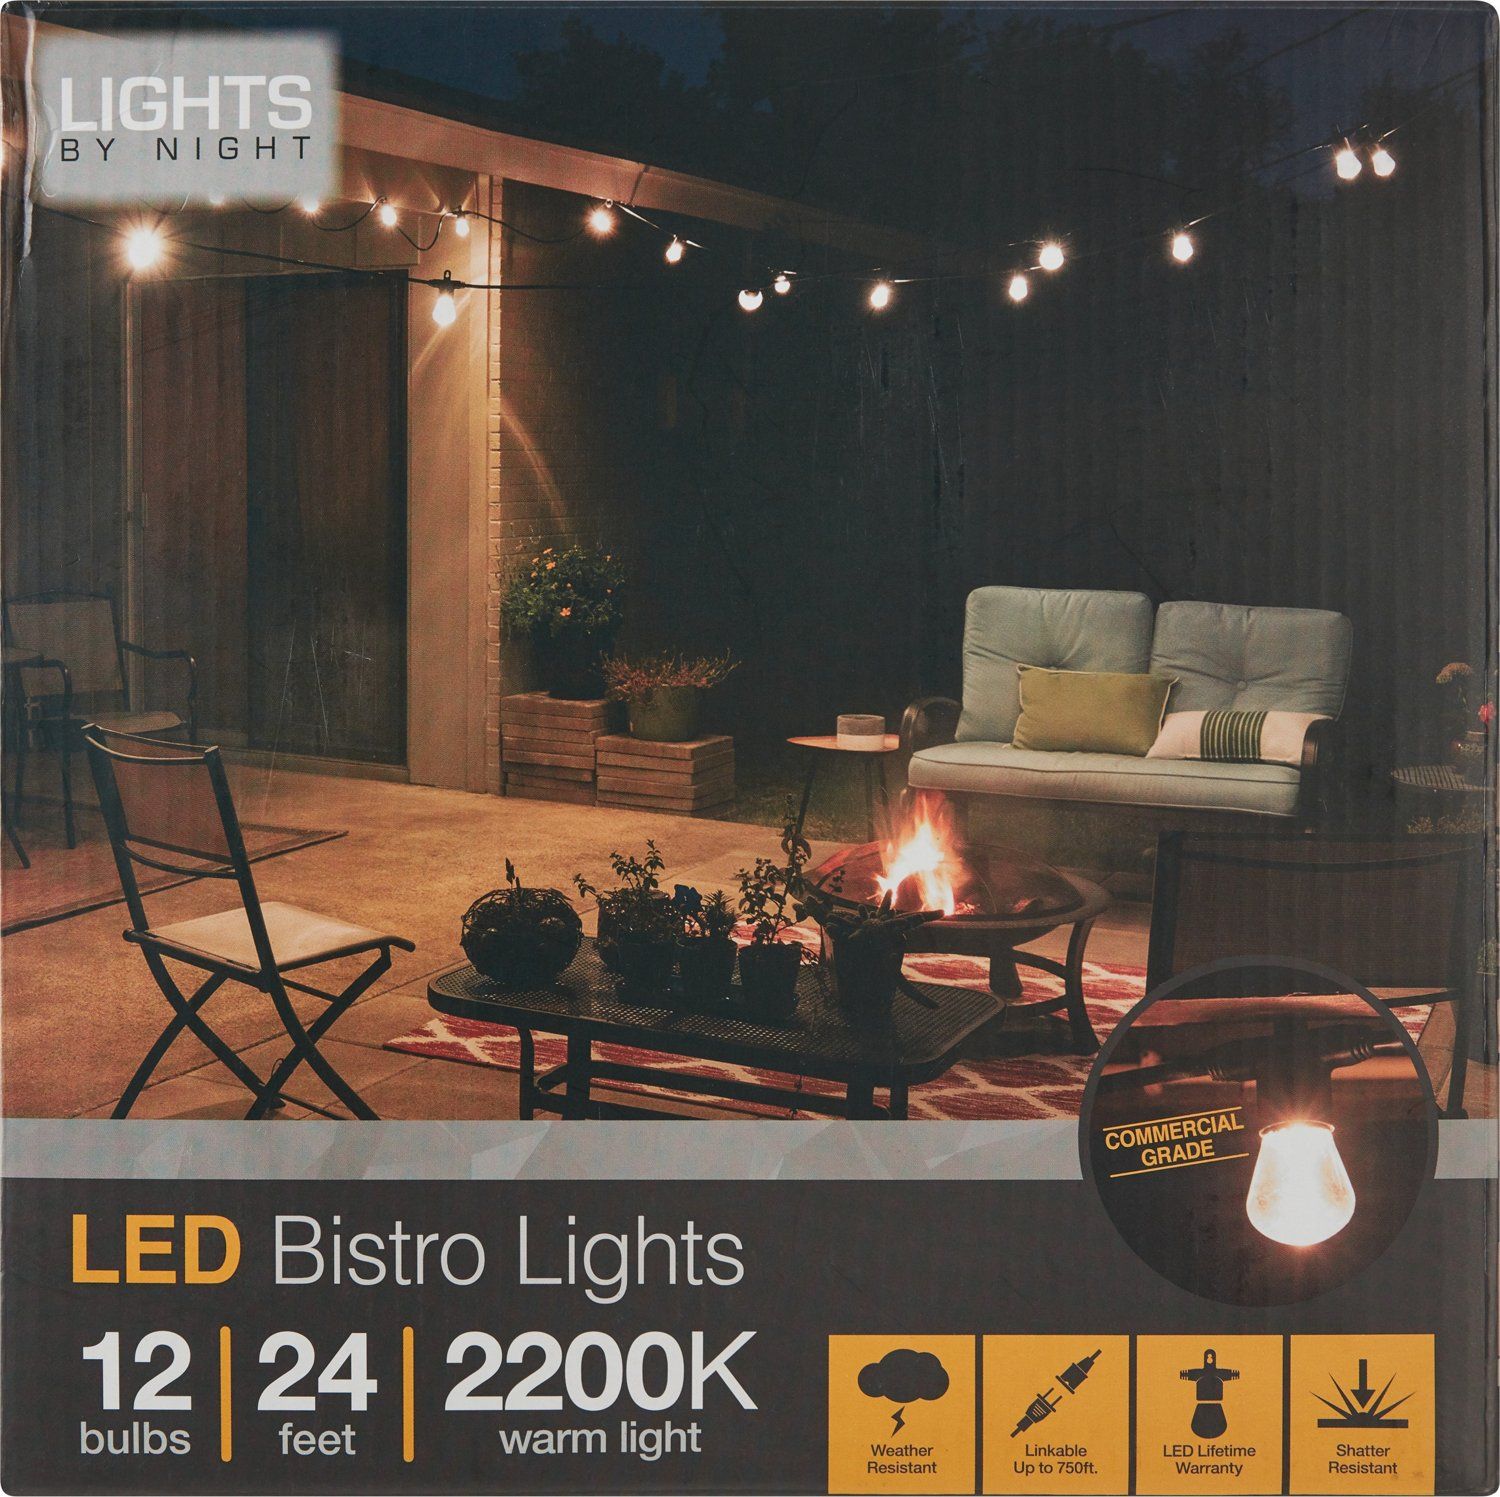 Lights By Night LED Bistro String Lights | Academy Sports + Outdoor Affiliate